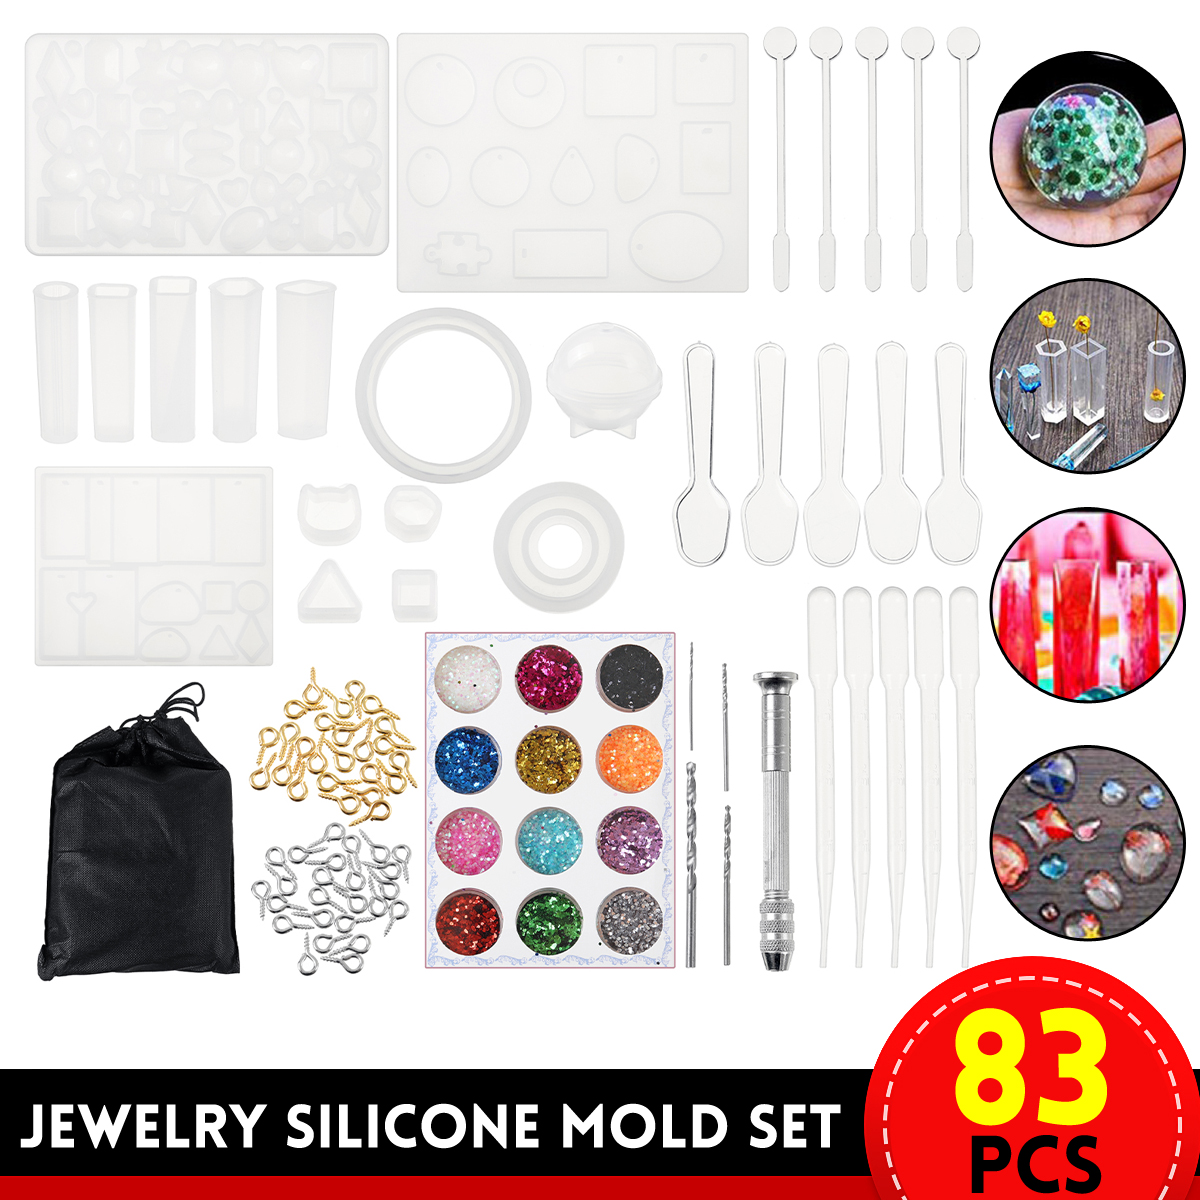 83x-Silicone-Resin-Casting-Mold-Tool-Sets-Kit-DIY-Pendant-Jewelry-Bracelet-Making-1808640-1